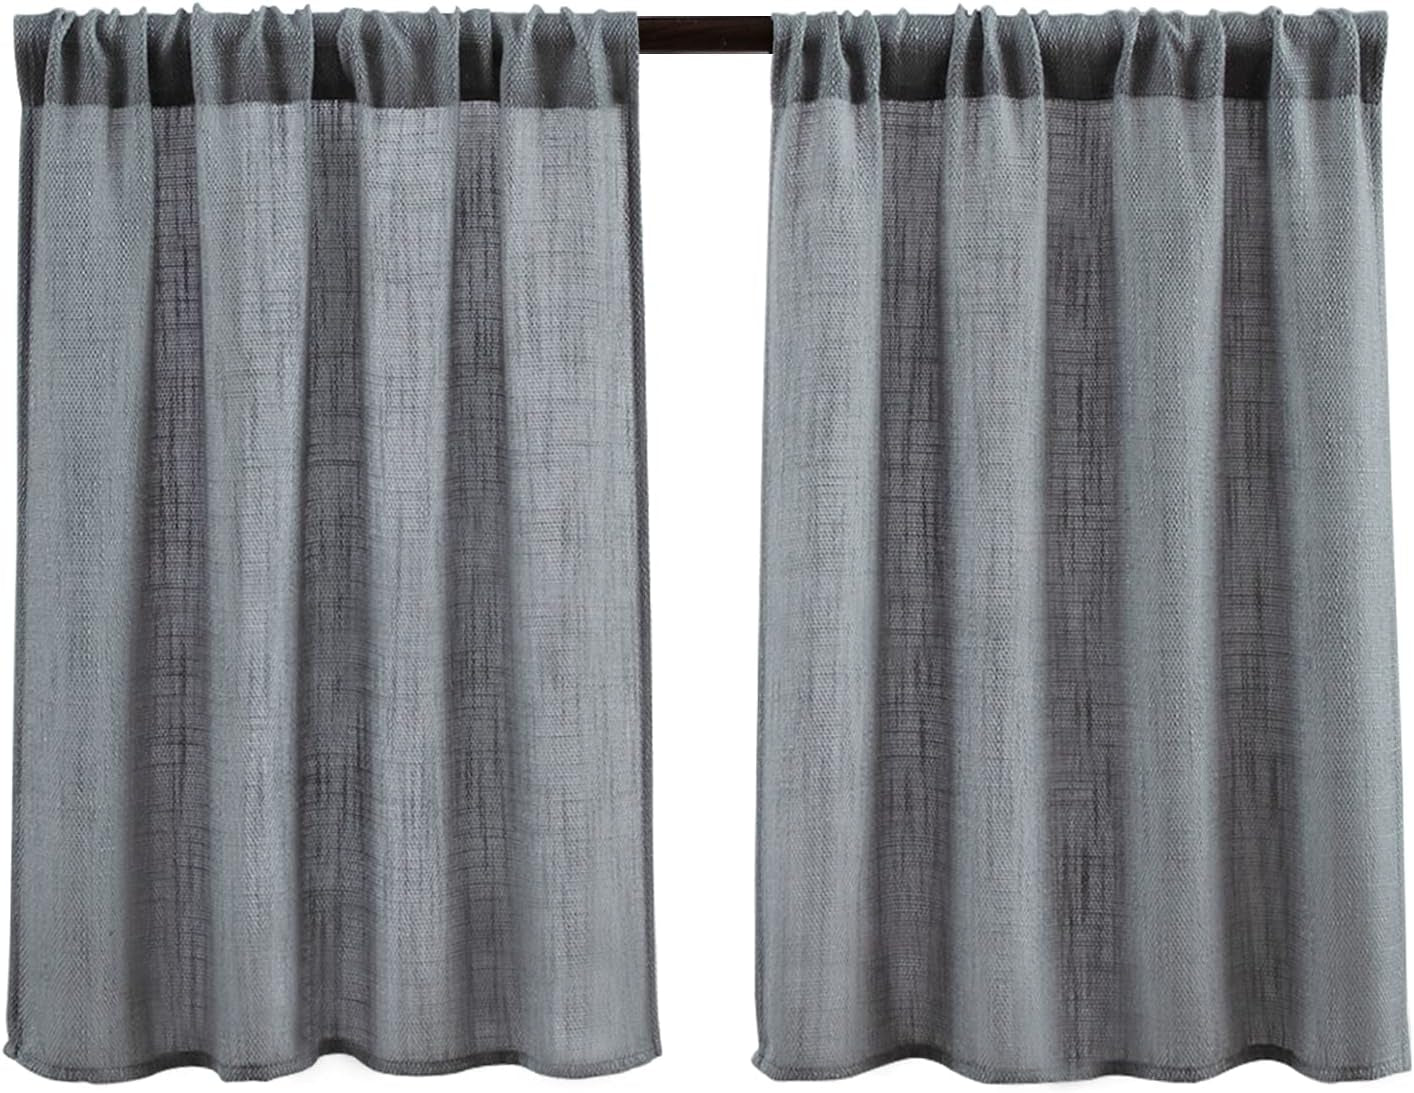 Valea Home Soft Burlap Short Curtains Rustic Natural Rod Pocket Curtain Panels for Small Window 45 Inch Length Cafe Kitchen Curtains, 2 Panels, White  Valea Home Grey 26"Wx36"L 